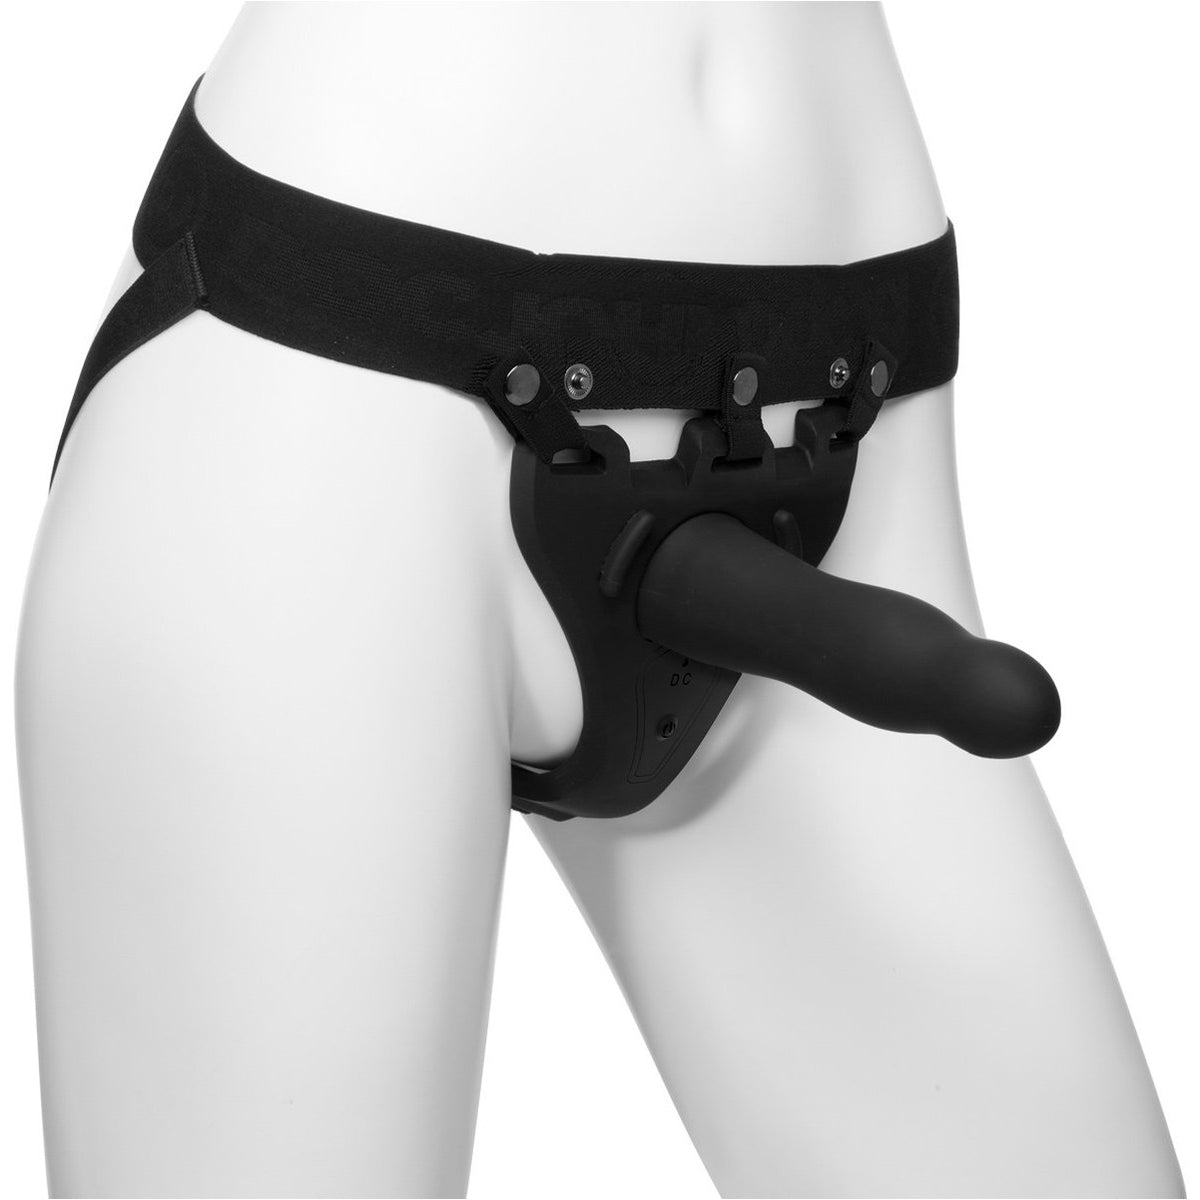 Doc Johnson Body Extensions – Be Aroused 2 Piece Strap-On Set with Vibrating Harness